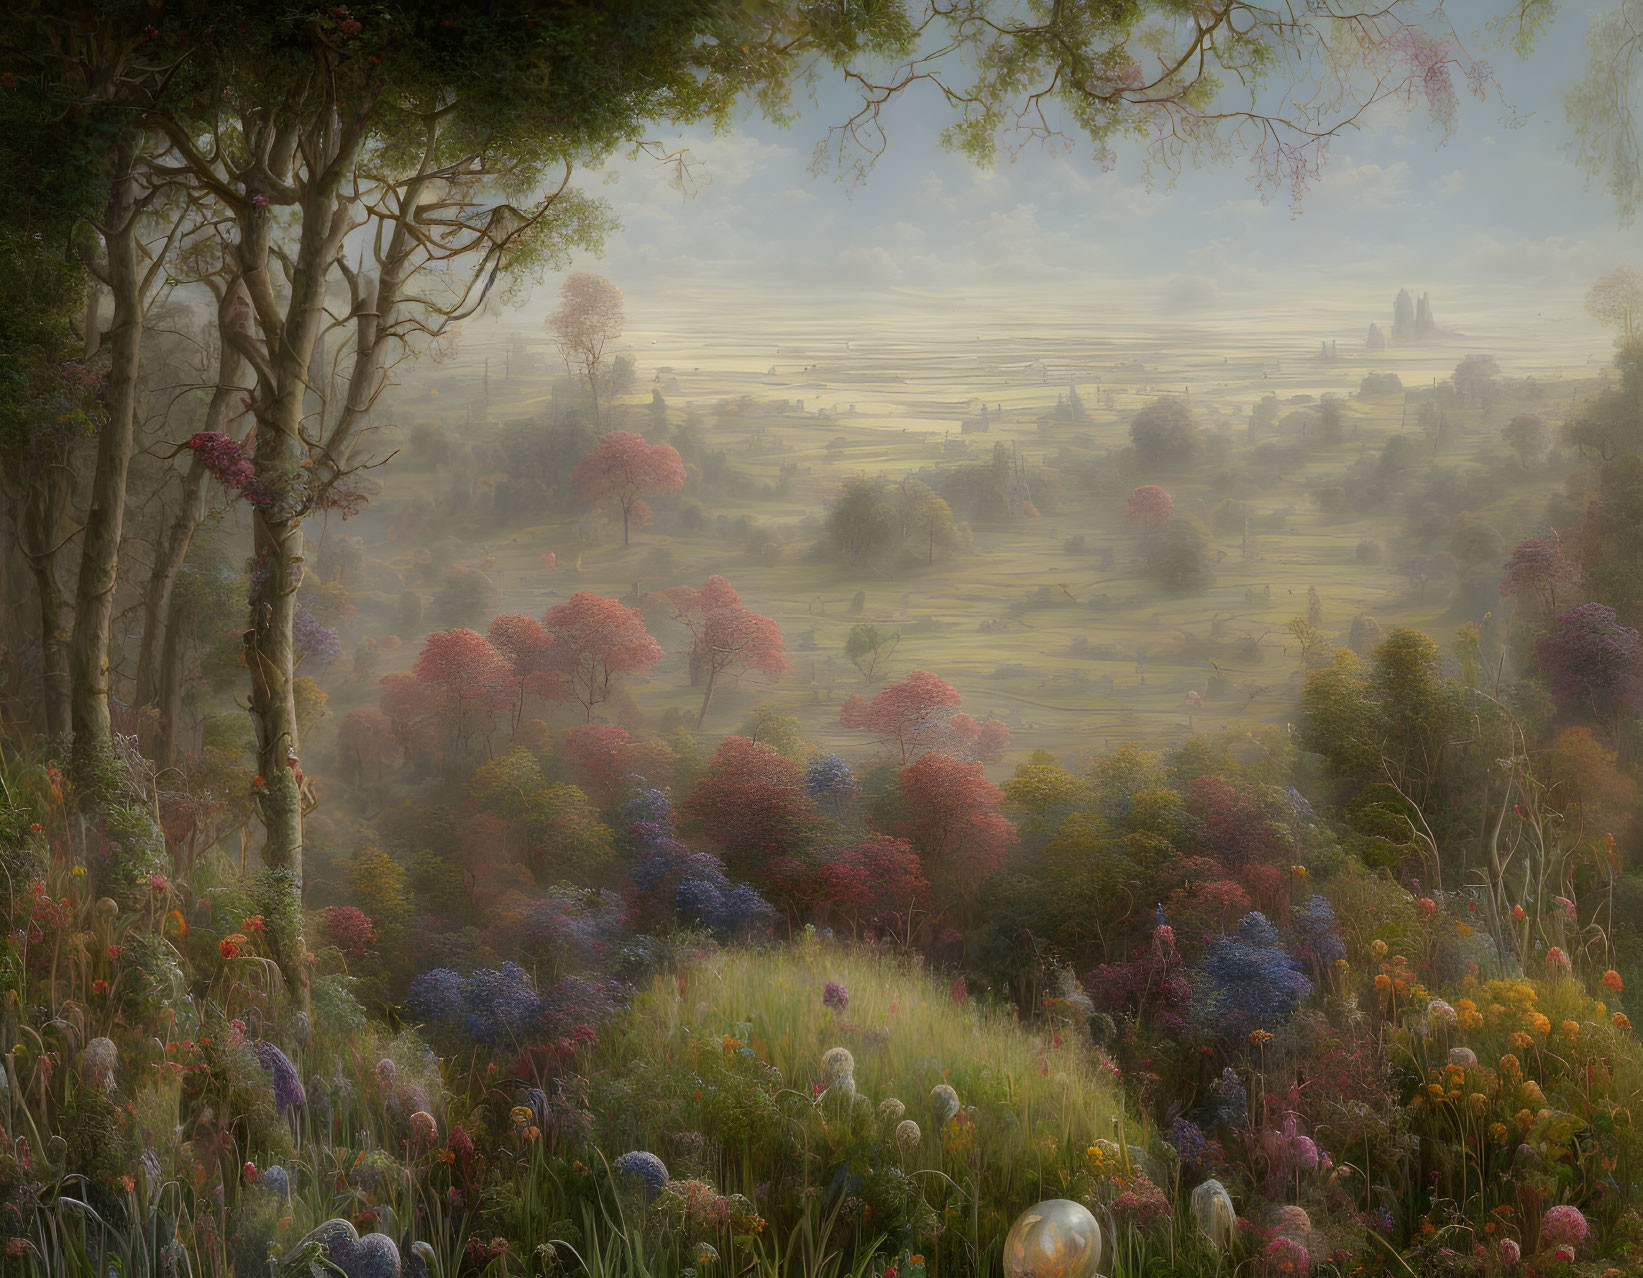 Tranquil dawn landscape with colorful trees, misty fields, and flowers under hazy sky